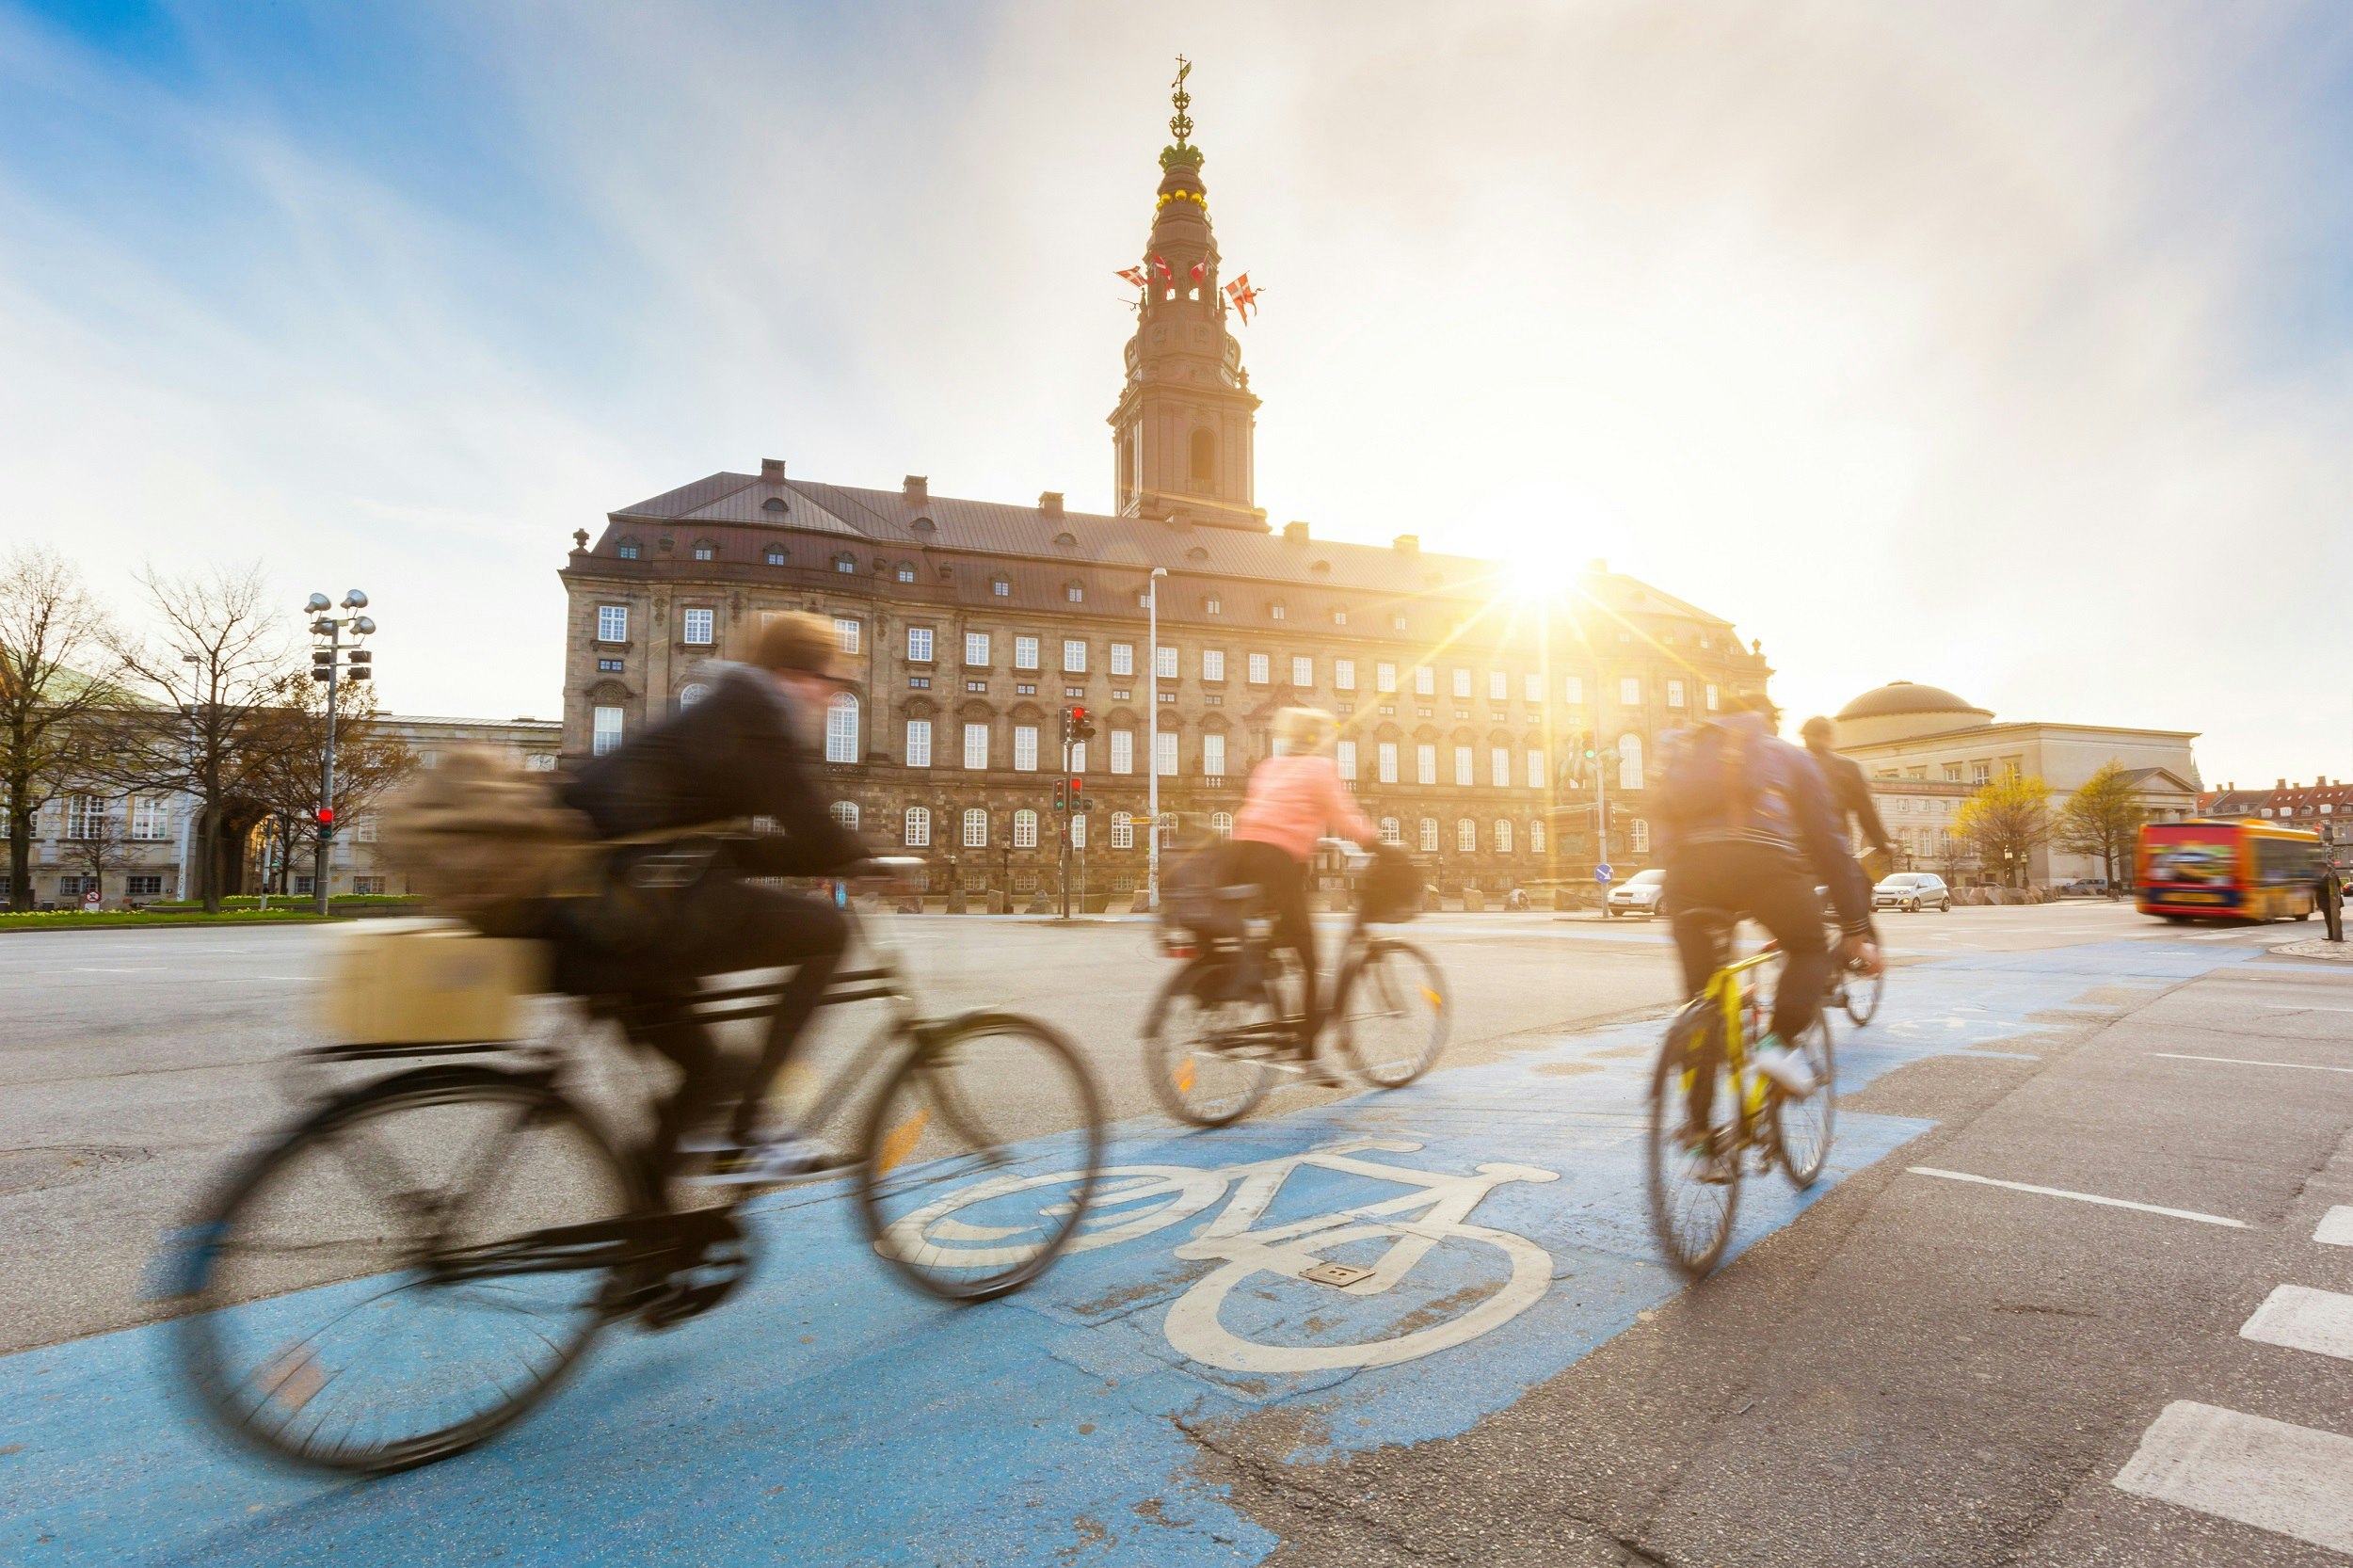 A group of blurred cyclists on a blue cycle path pass in front of a large building with a single central tower